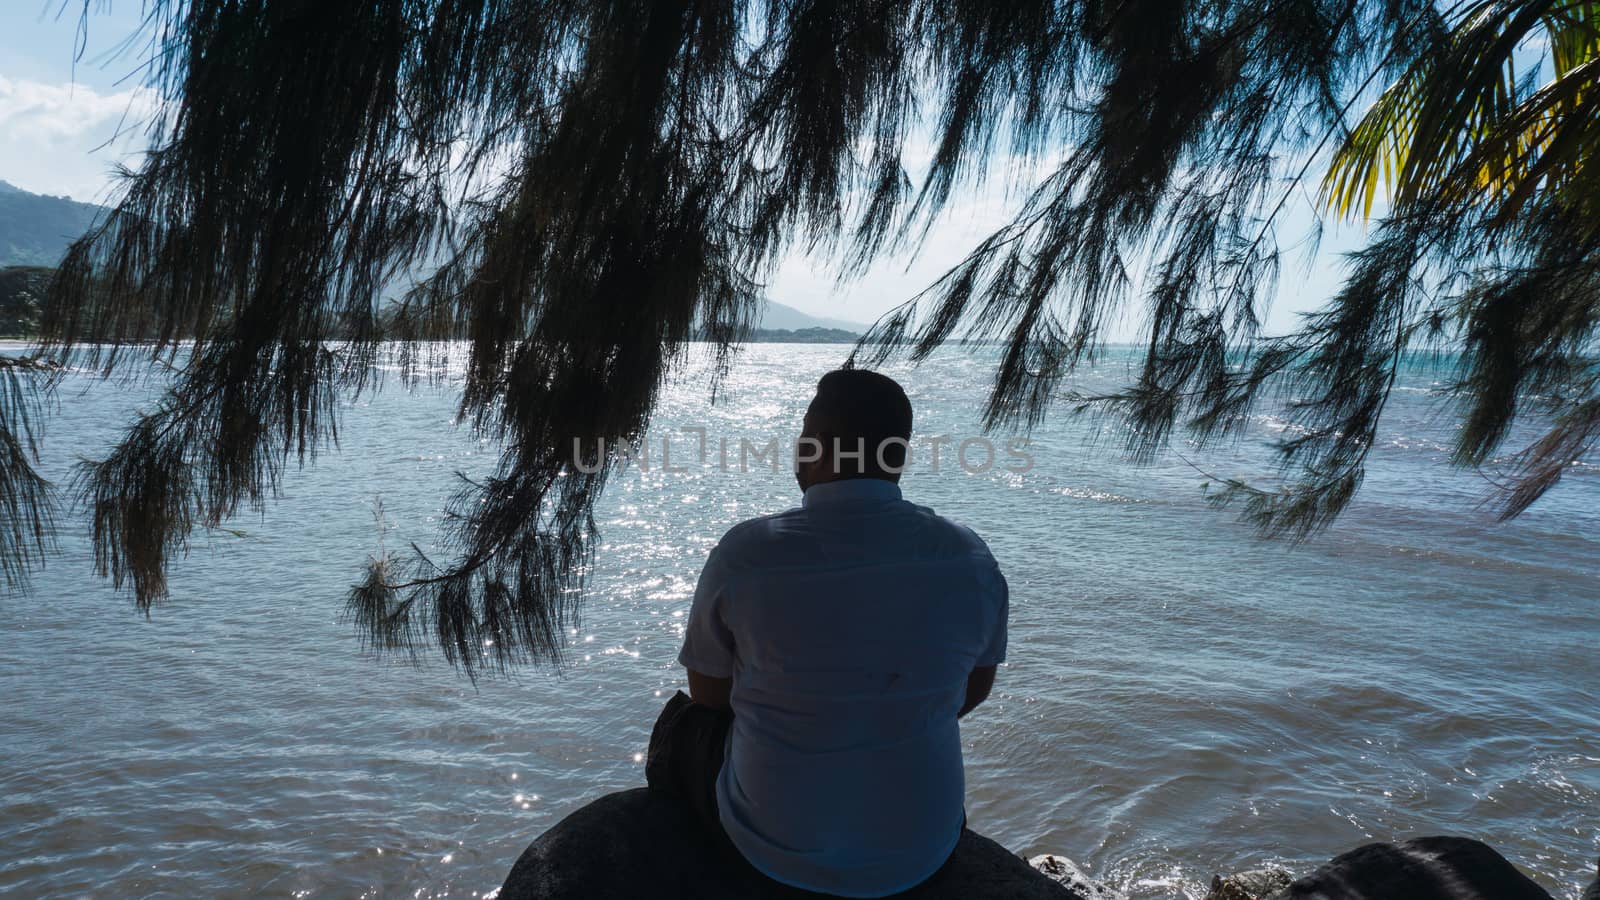 Along man sitting on a rock relaxing and reflexion with a beautiful blue sky and sea